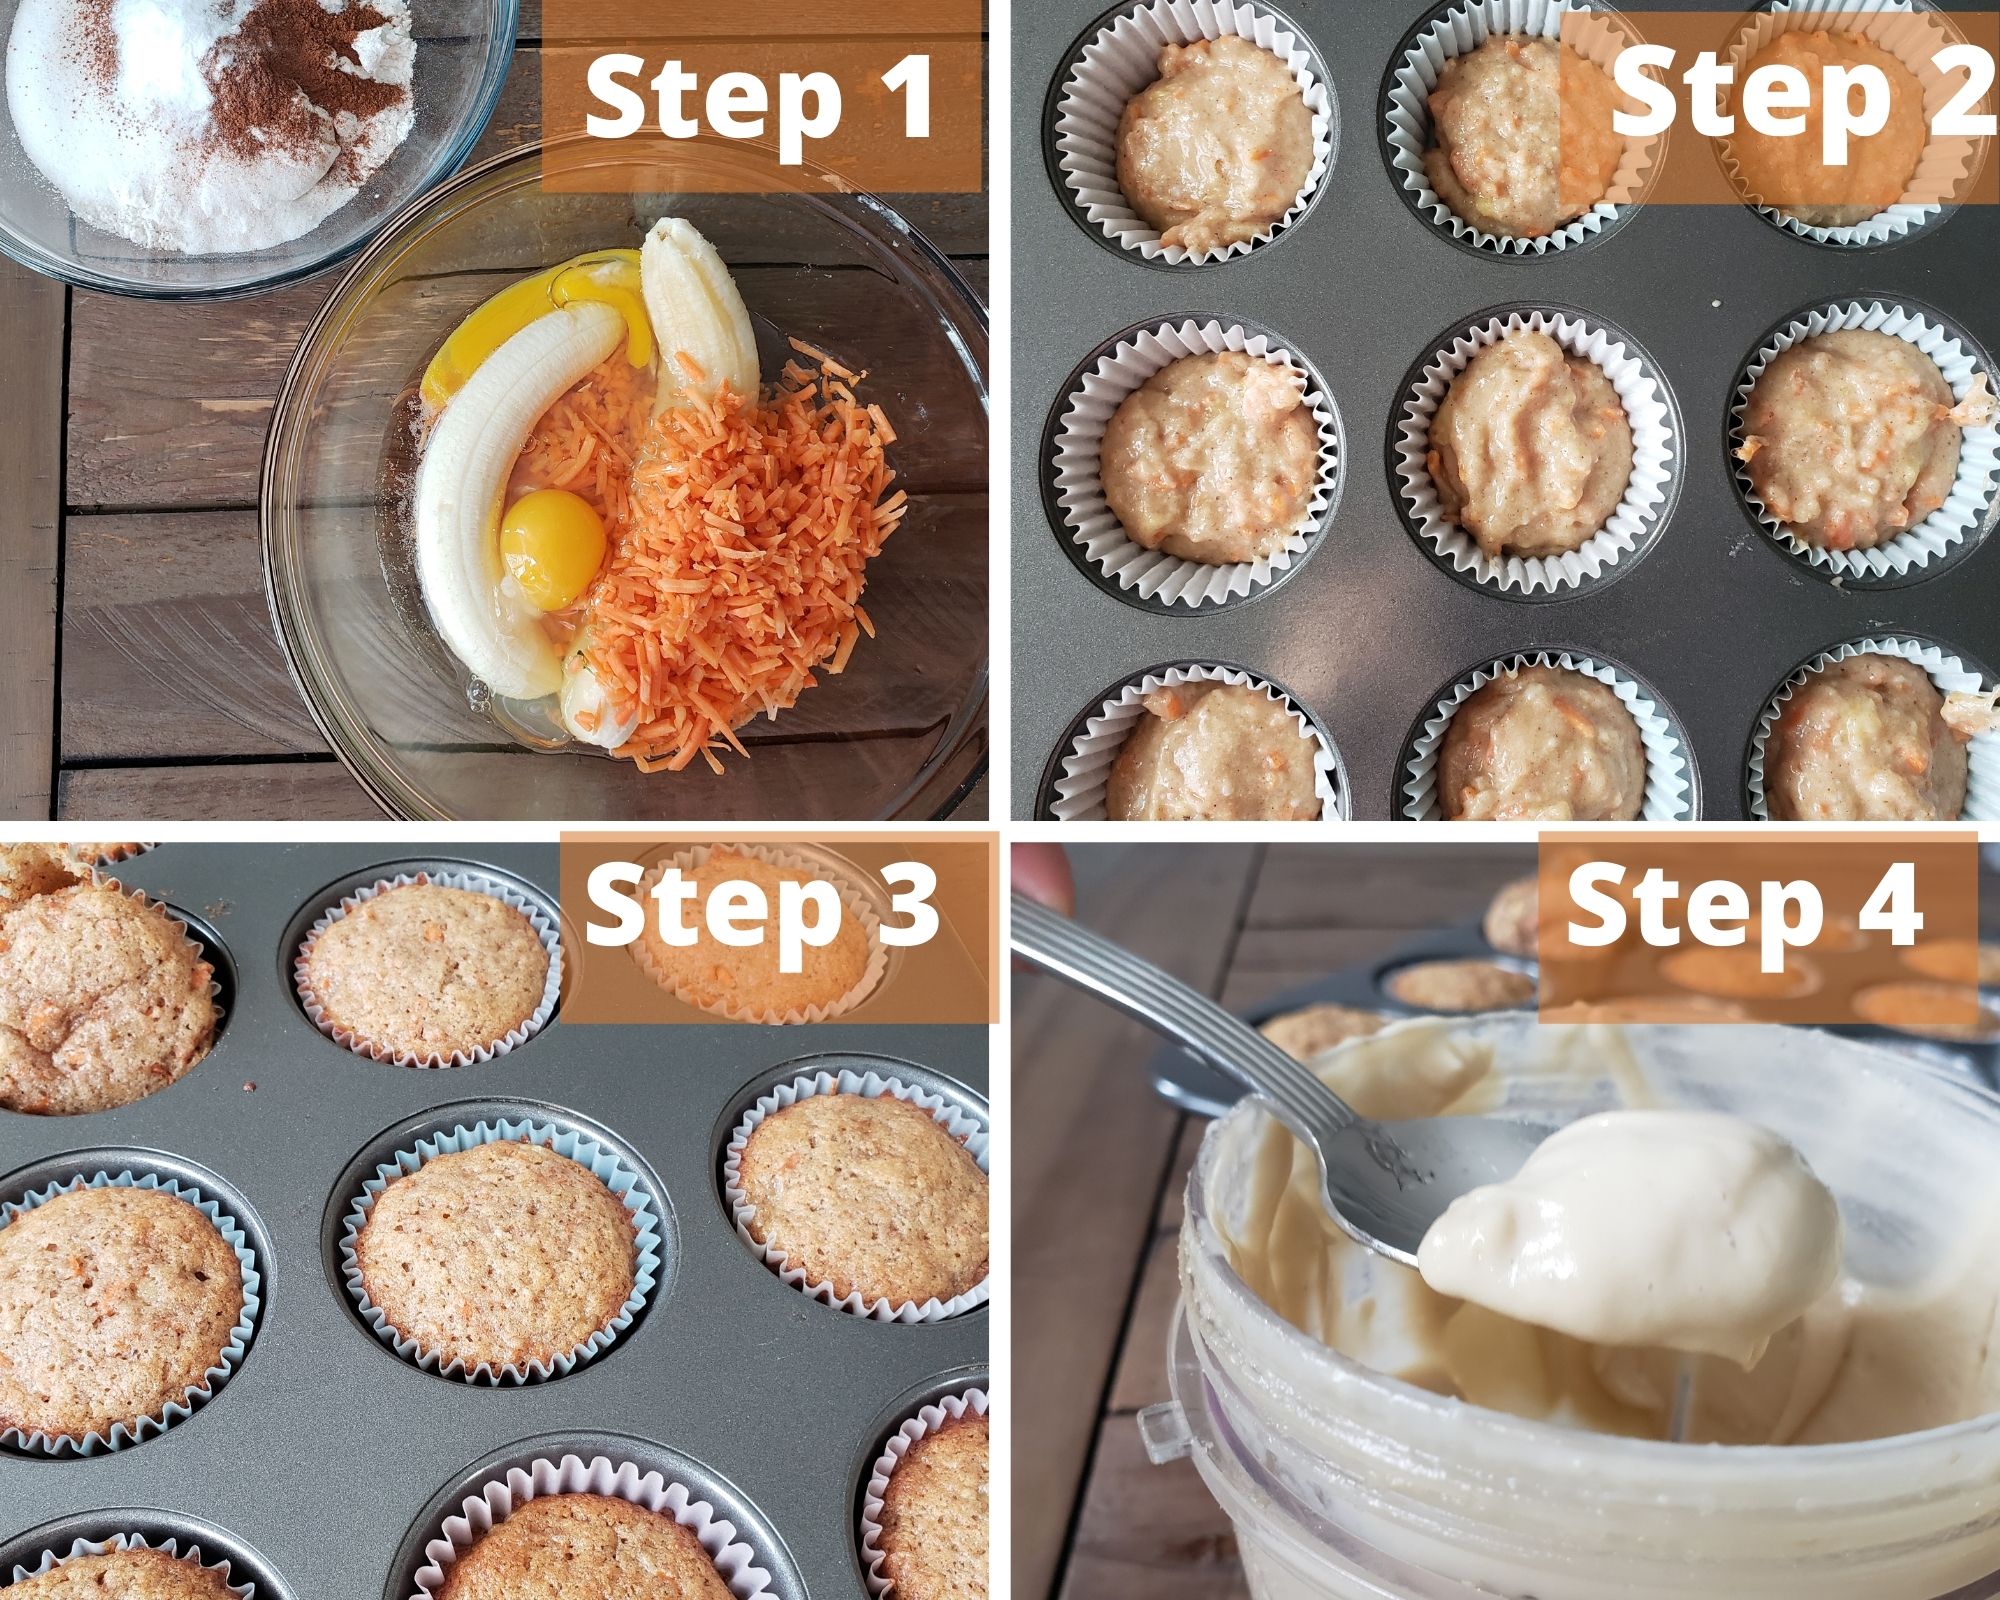 steps for baking these carrot cake muffins.